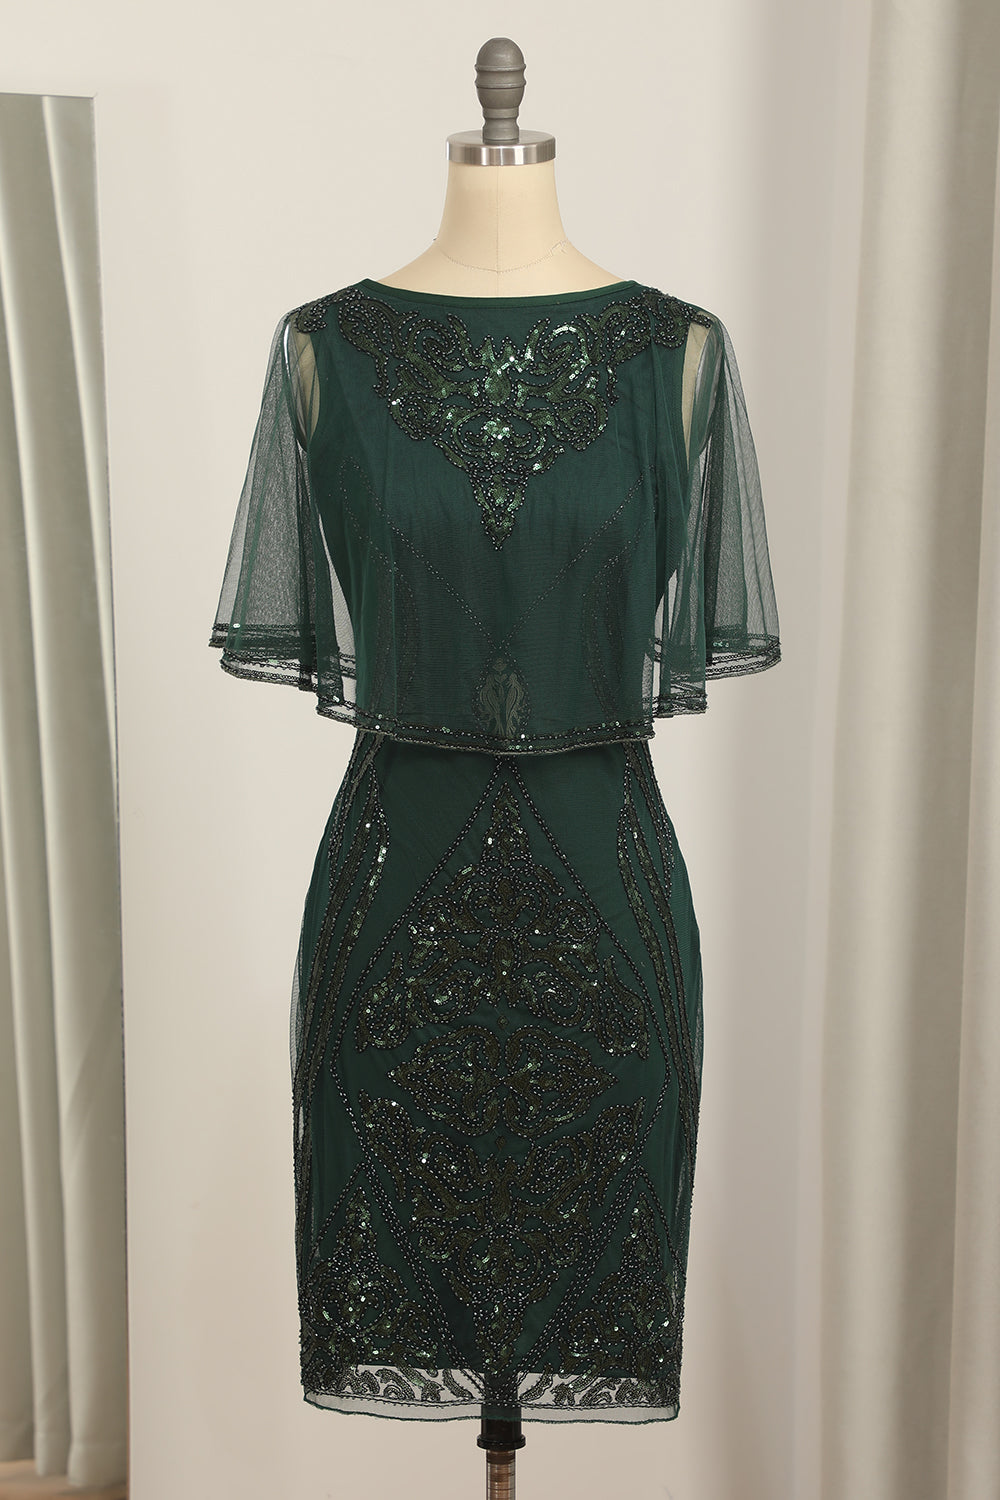 Dark Green Bateau Neck Mother Of The Bride Dress With Cape